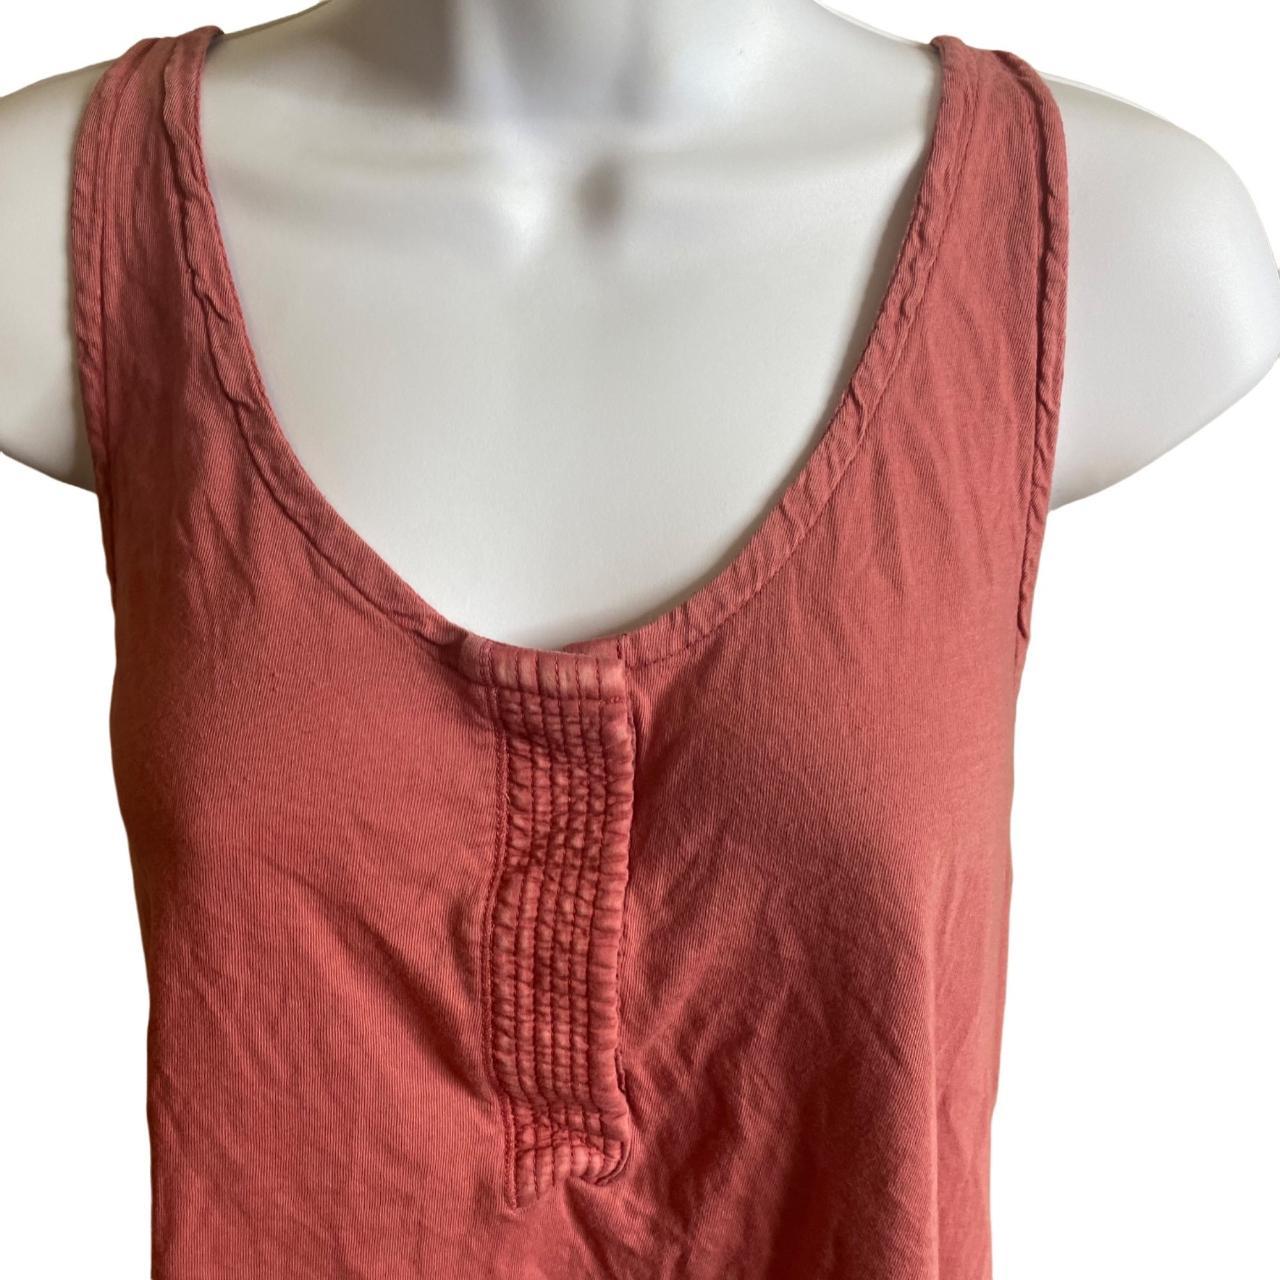 Product Image 2 - KENJI TANK

DISTRESSED RED

100% COTTON

SIZE L

HIGH